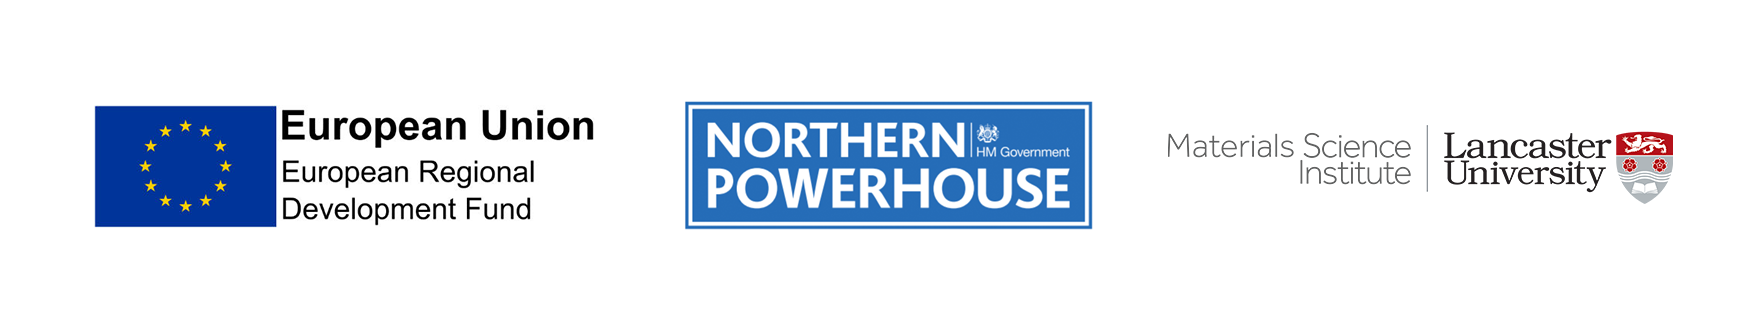 ERDF, Northern Powerhouse and Materials Science Institute logos